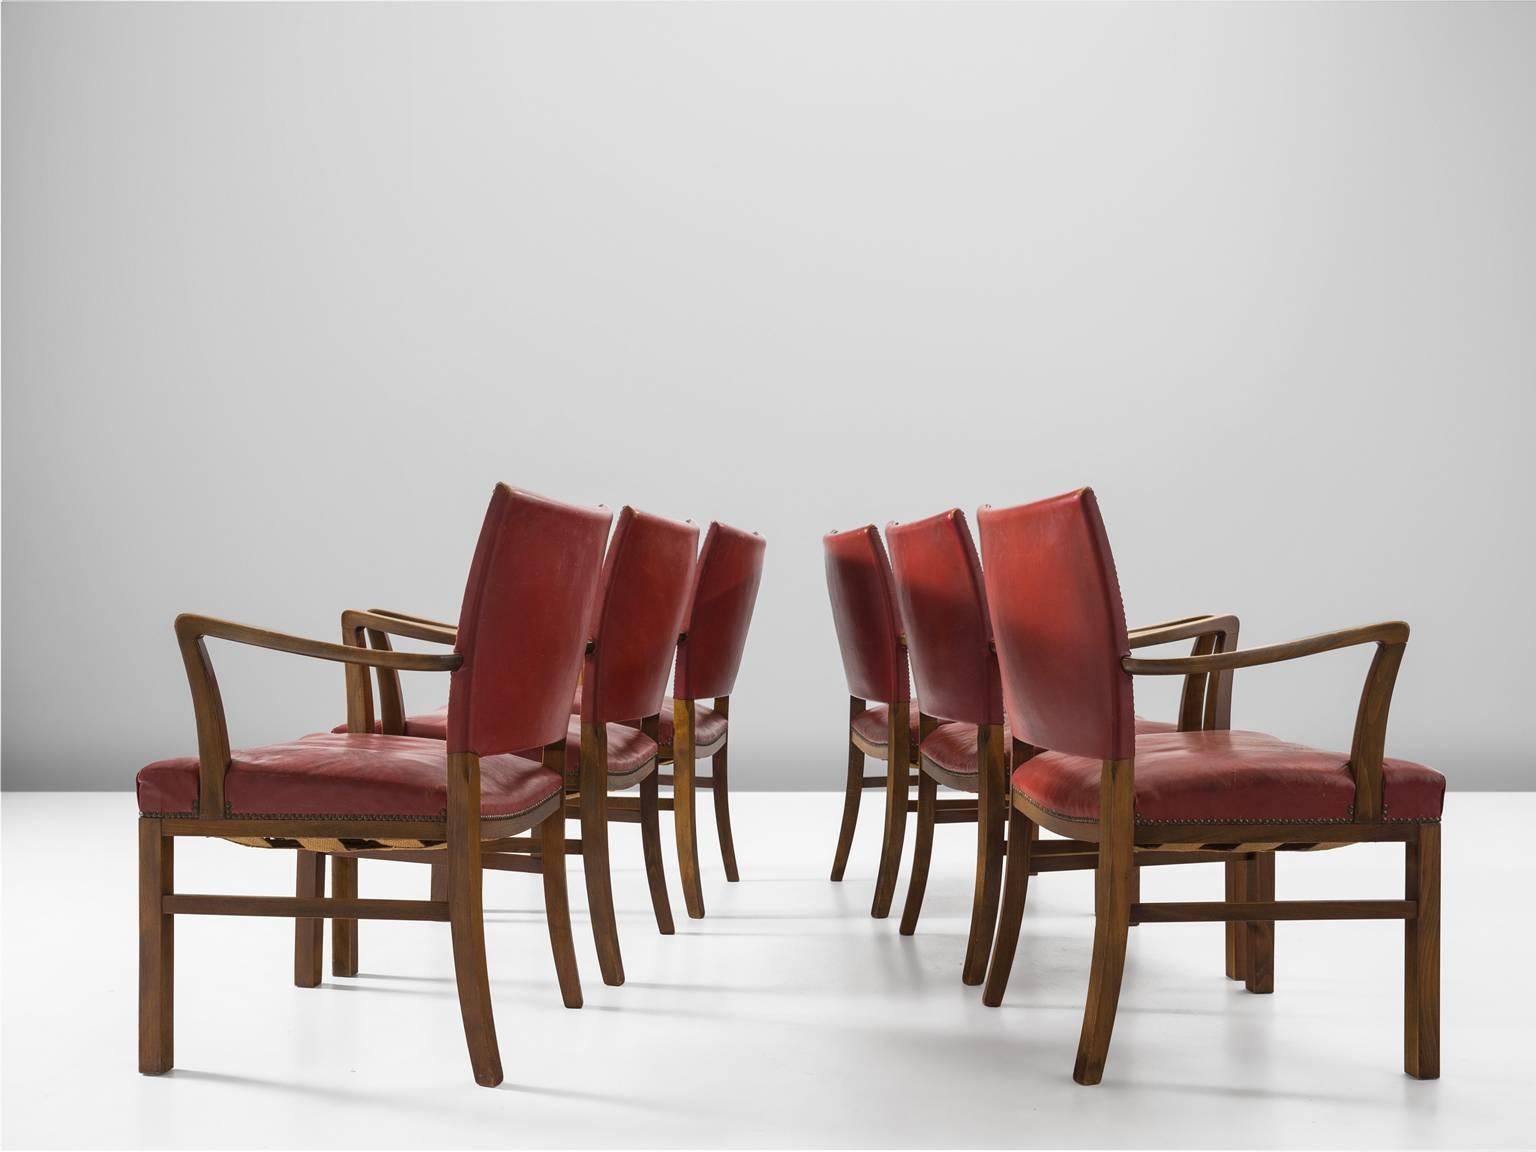 Armchairs, red leather and beech, 1930s, Denmark.

These red patinated armchairs atrributed to Jacob Kjaer (1896-1957). The style of these chairs is formal and robust and is in the line of the designs of Kaare Klint. The leather is attached to the